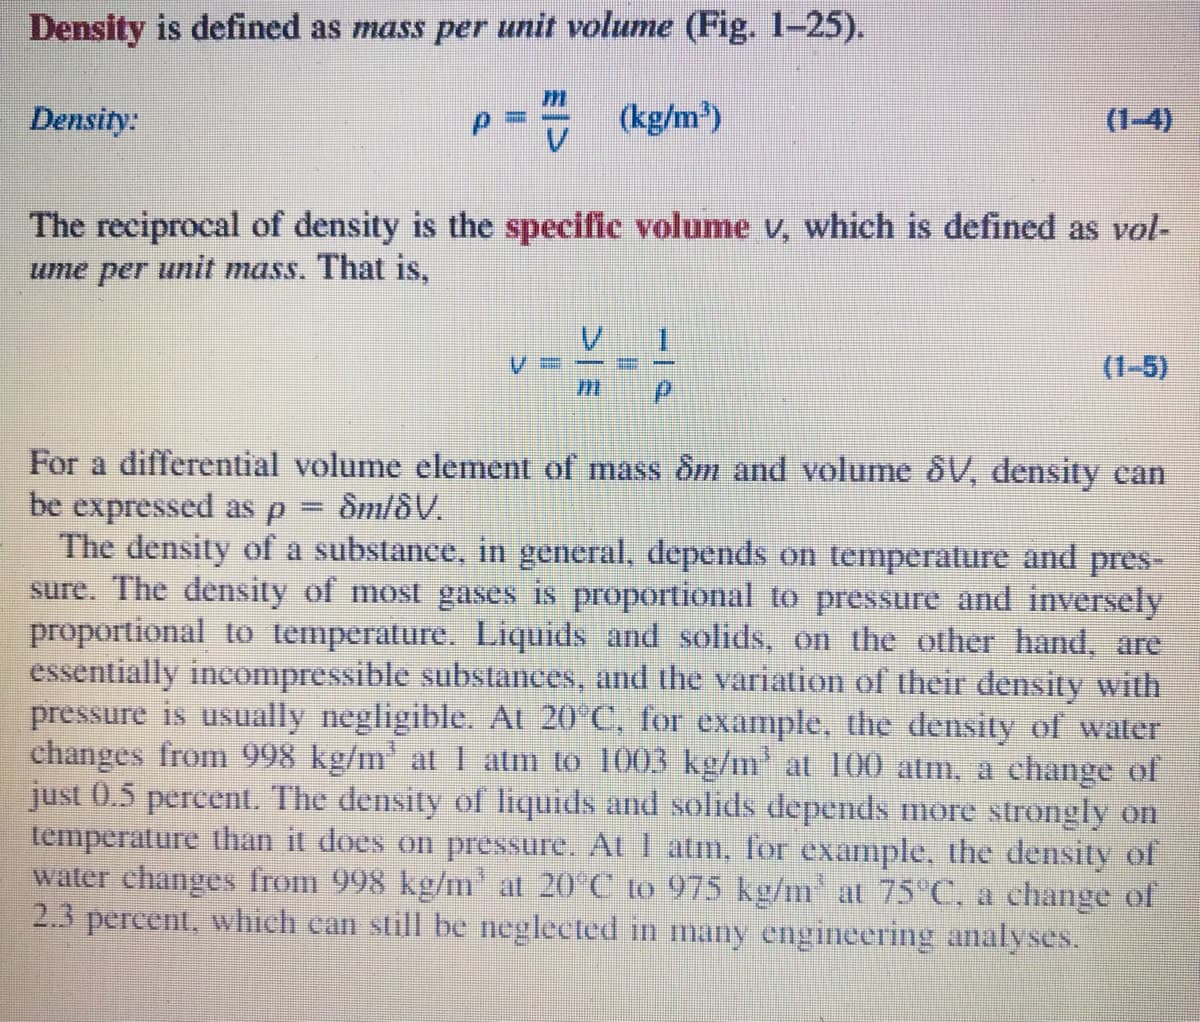 Density is defined as mass per unit volume (Fig. 1-25).
Density:
(kg/m)
(1-4)
The reciprocal of density is the specific volume v, which is defined as vol-
ume per unit mass. That is,
(1-5)
For a differential volume element of mass ôm and volume &V, density can
be expressed as P
The density of a substance, in general, depends on temperature and pres-
sure. The density of most gases is proportional to pressure and inversely
proportional to temperature. Liquids and solids, on the other hand, are
essentially incompressible substances, and the variation of their density with
pressure is usually negligible. At 20°C, for example, the density of water
changes from 998 kg/m' at I atm to 1003 kg/m' at 100 atm, a change of
just 0.5 percent. The density of liquids and solids depends more strongly on
temperature than it does on pressure. At I atm, for example, the density of
water changes from 998 kg/m at 20°C to 975 kg/m at 75 C, a change of
2.3 percent, which can still be neglected in many engineering analyses.
Sm/8V.
